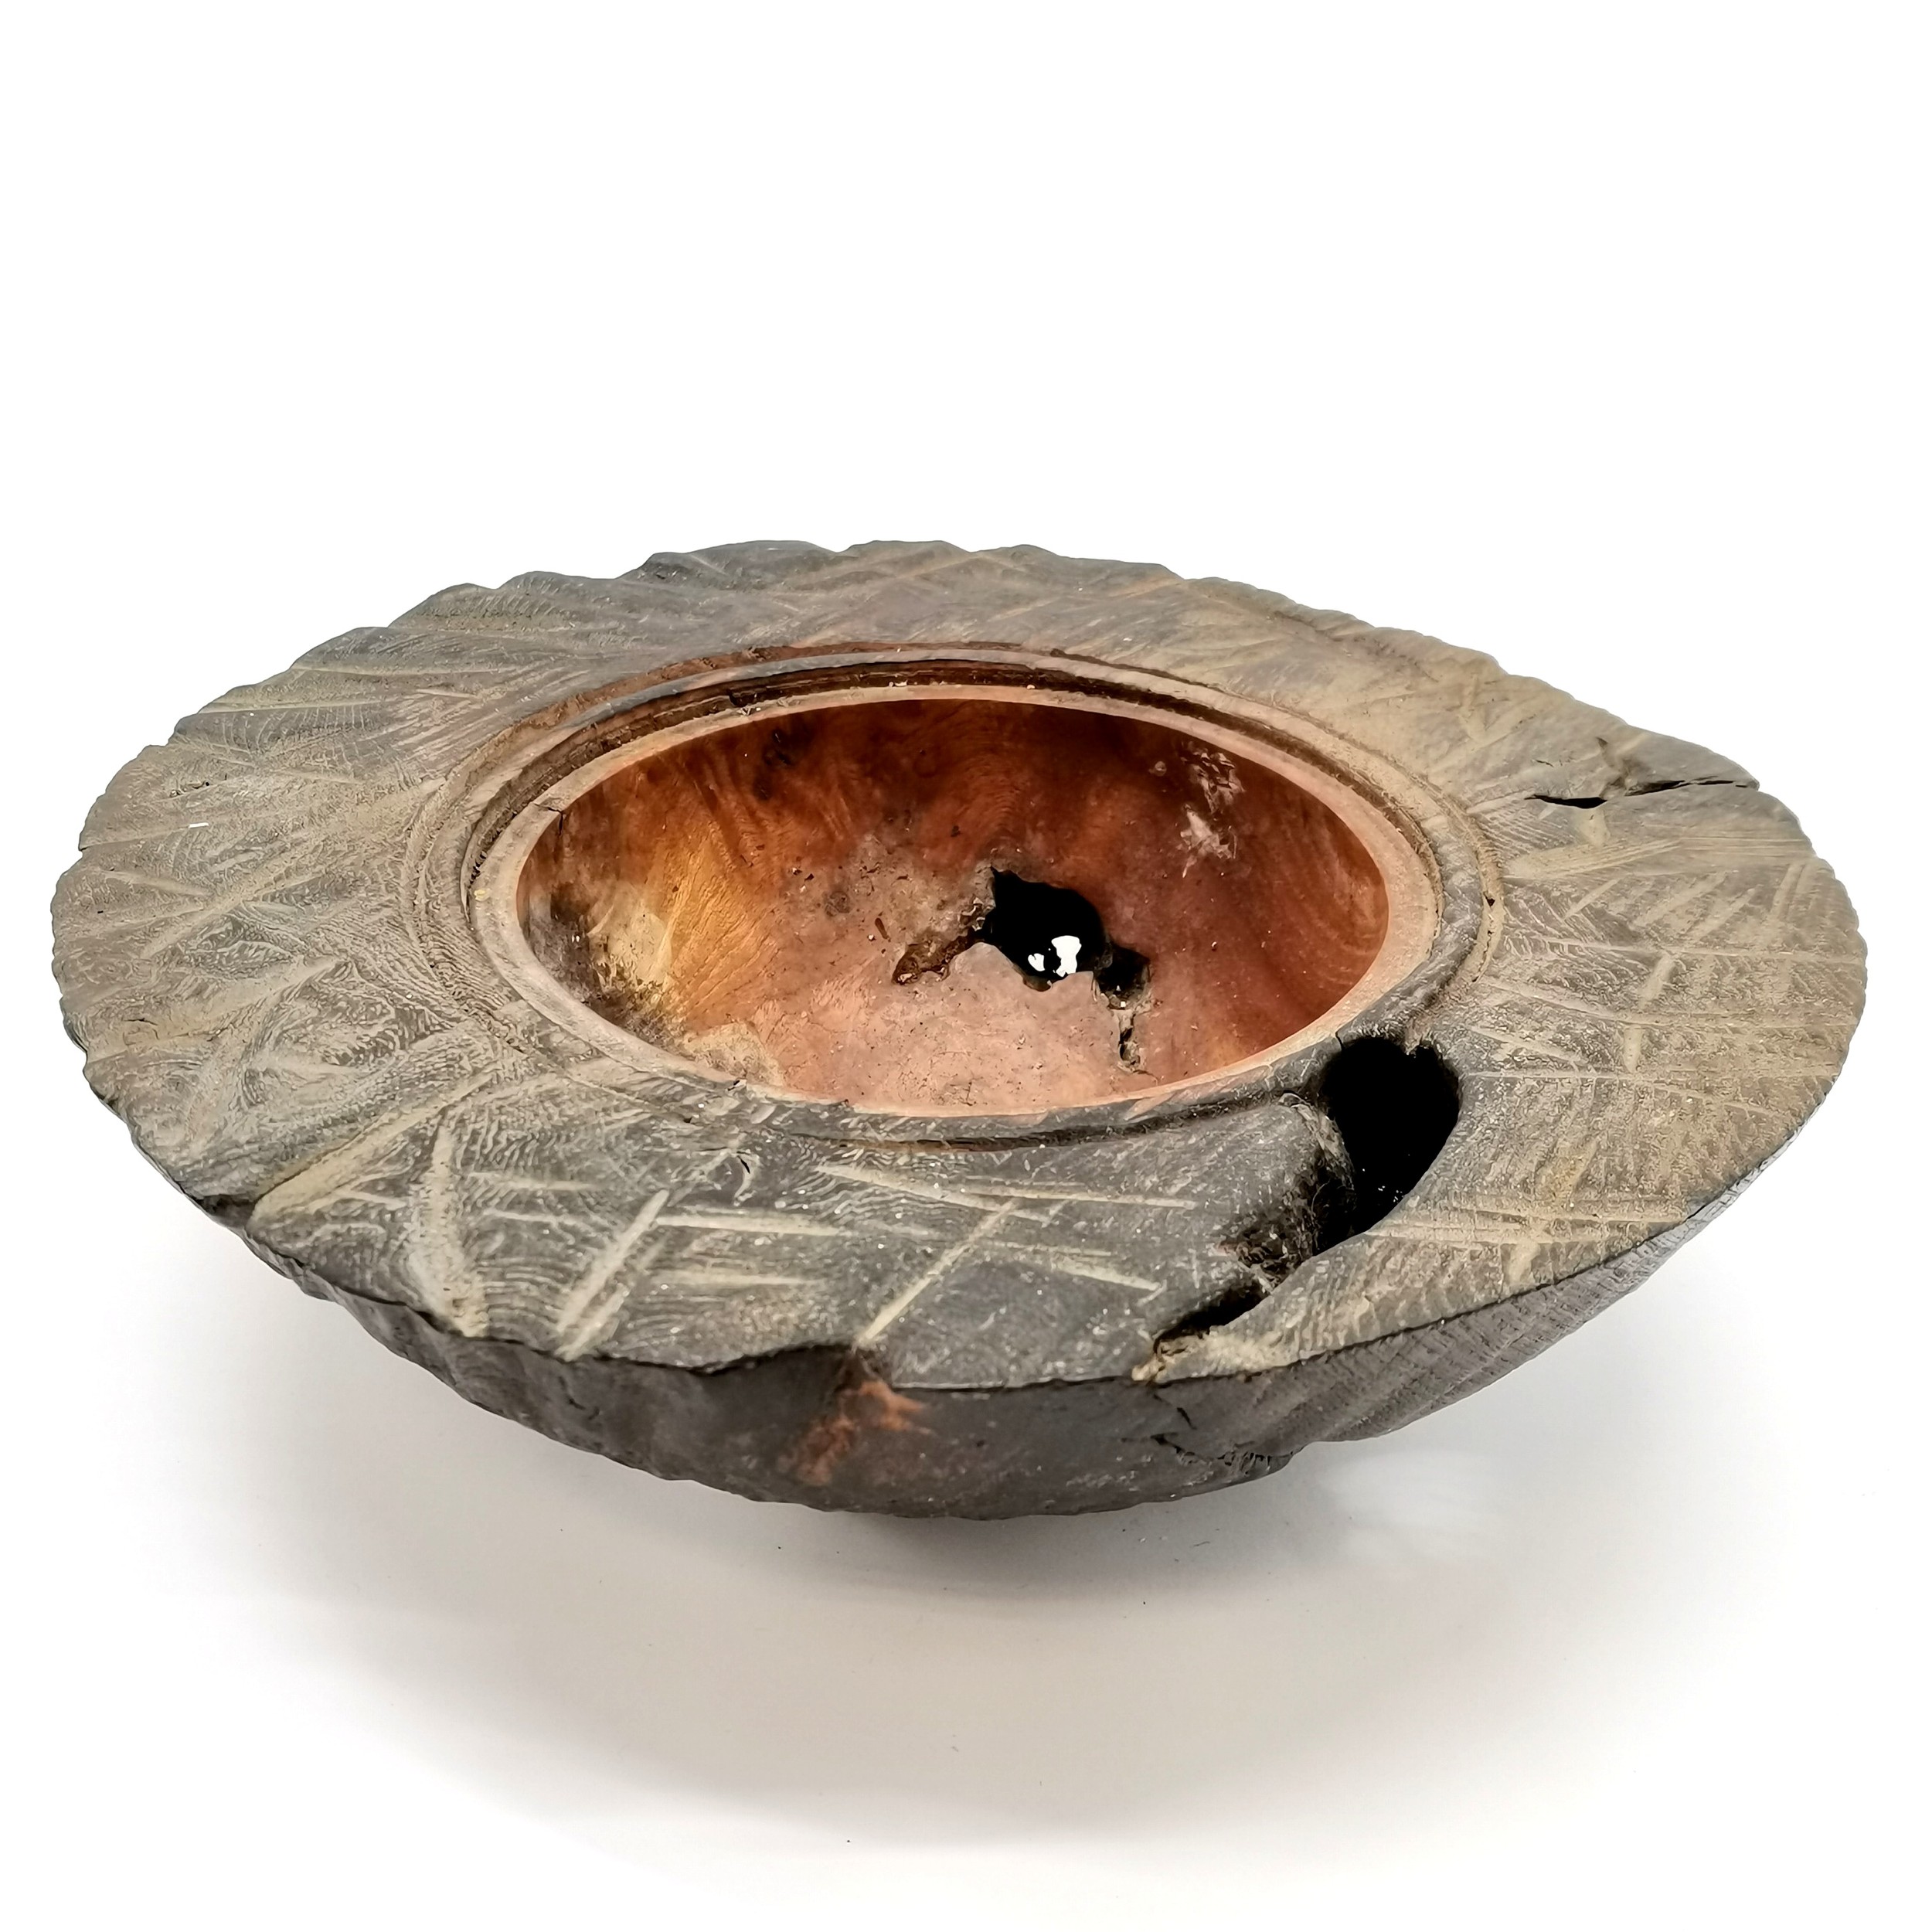 Hand turned rootwood burr elm bowl by Mike 'Chai' Scott - 26cm diameter